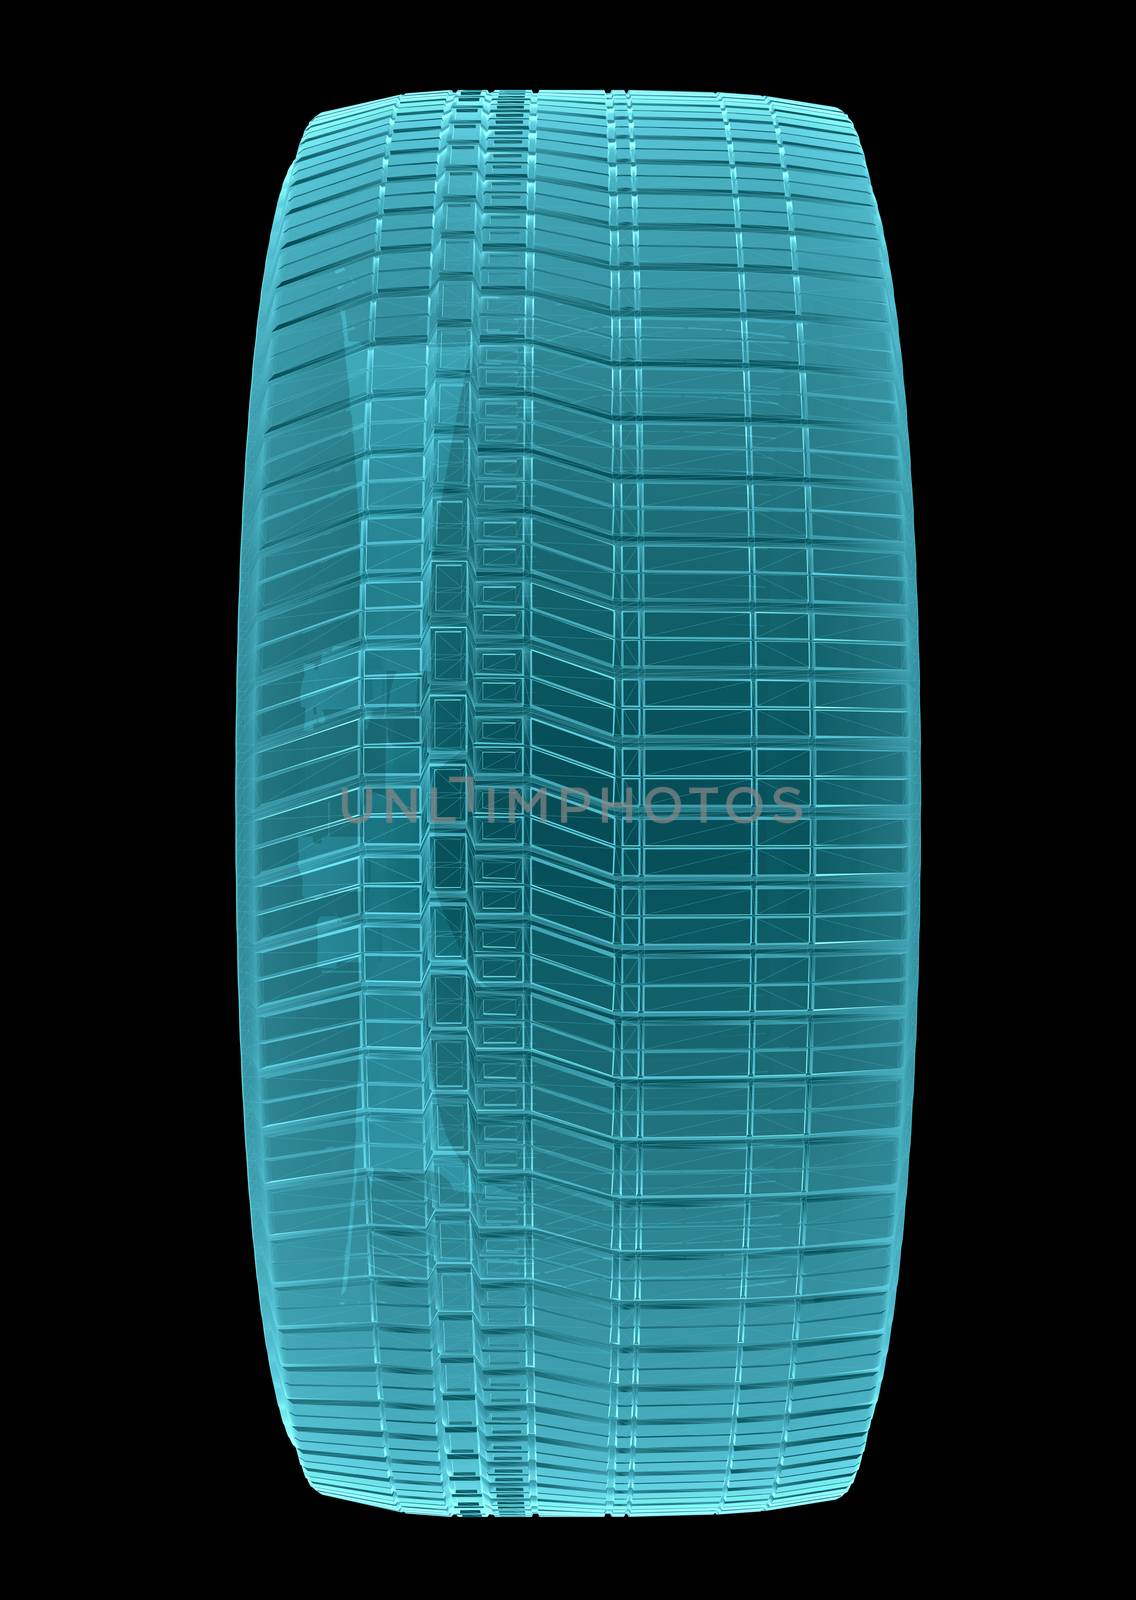 X-Ray Image Of Car Wheel, Isolated on Black Background. 3D Rendering